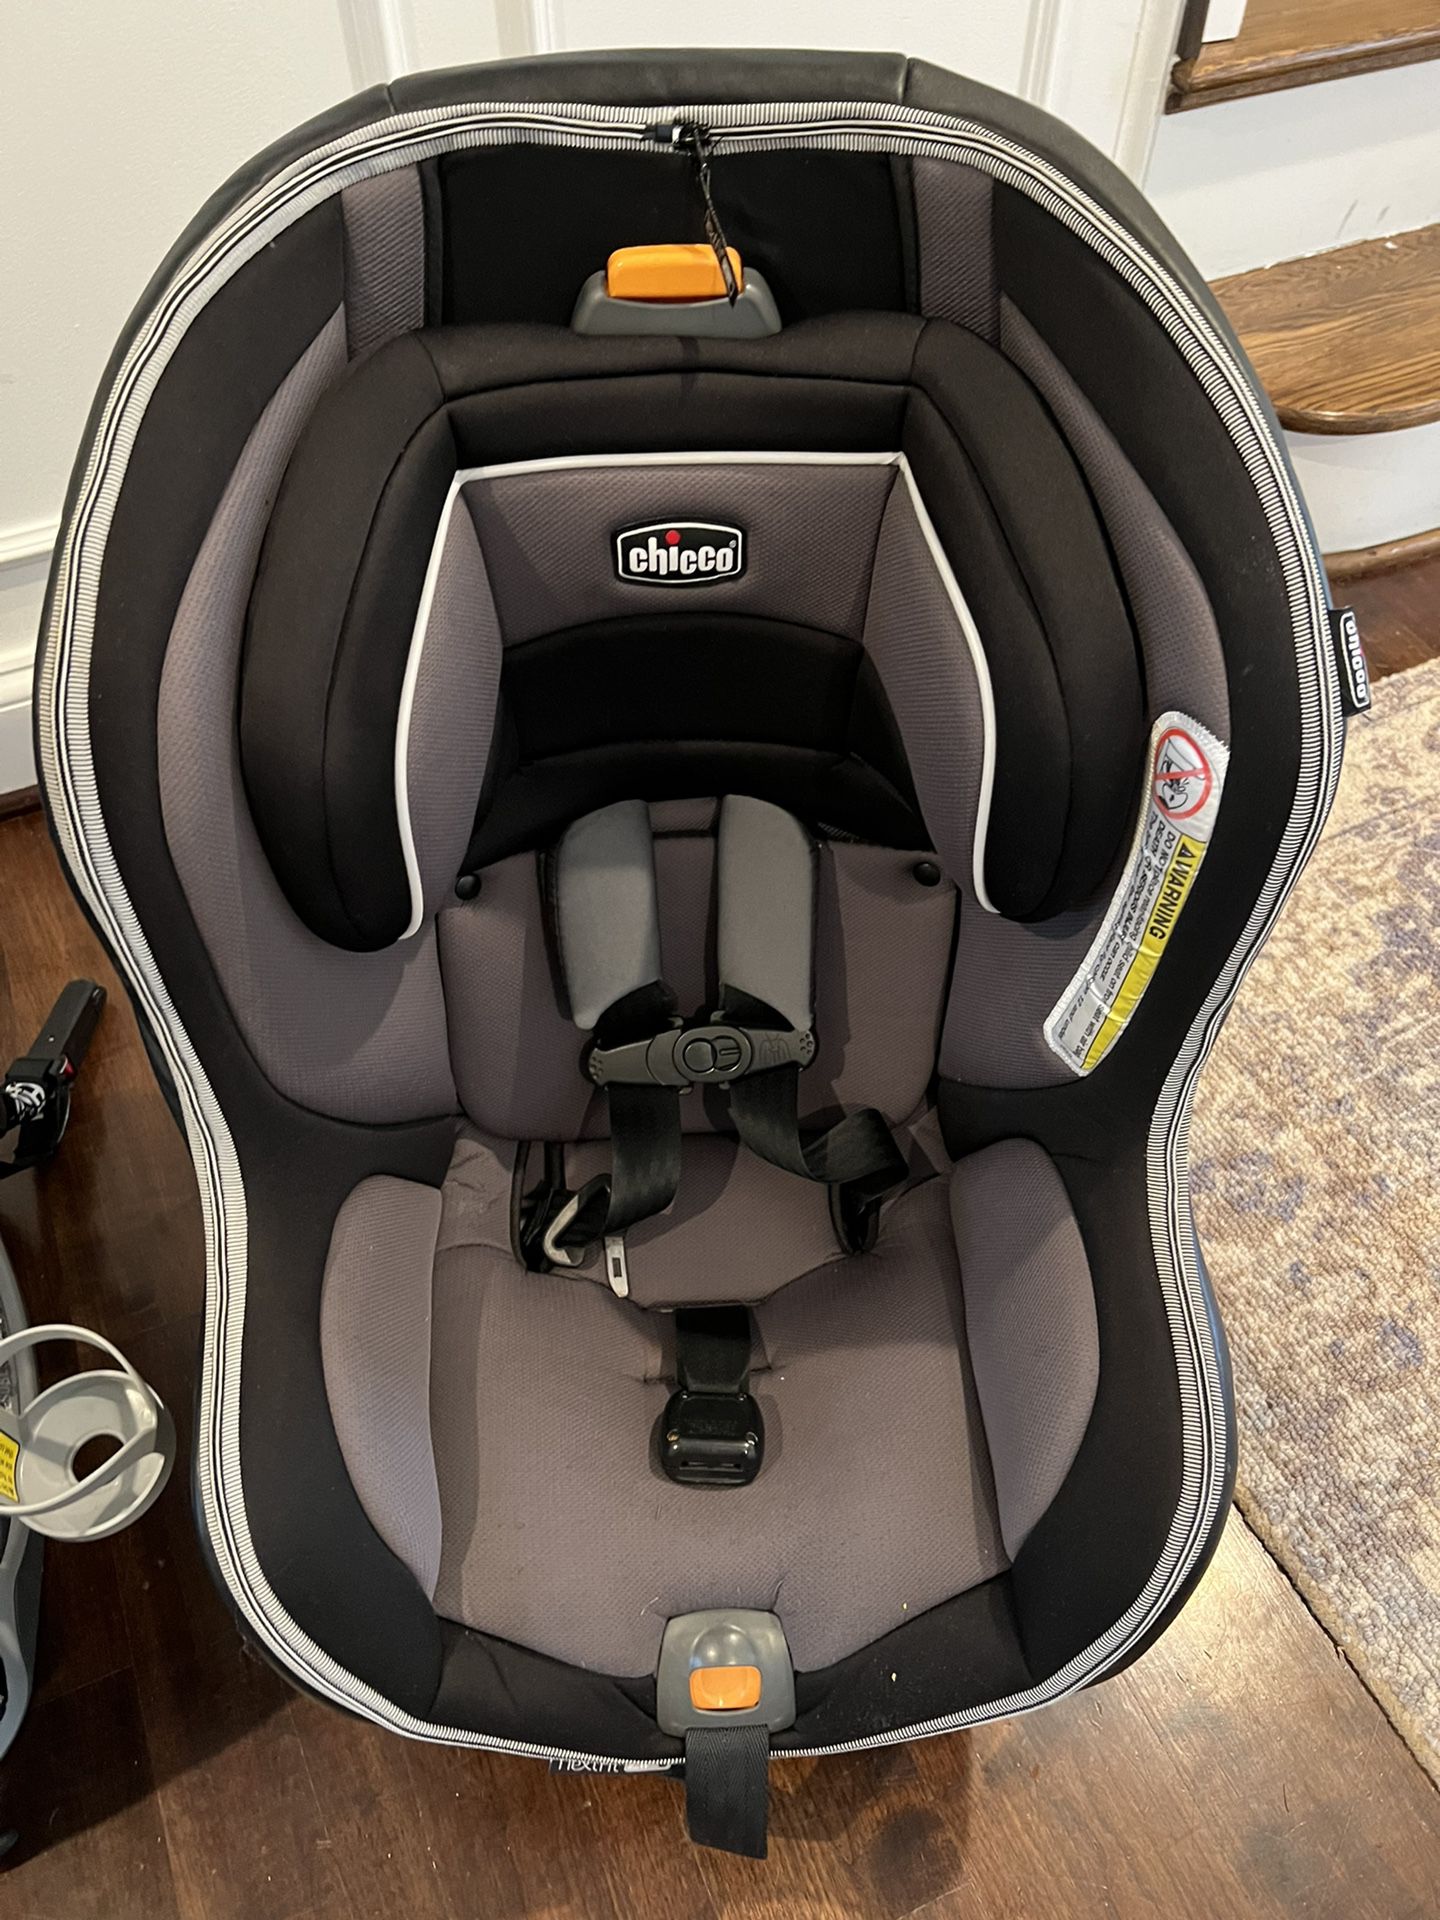 Chicco NextFit carseat